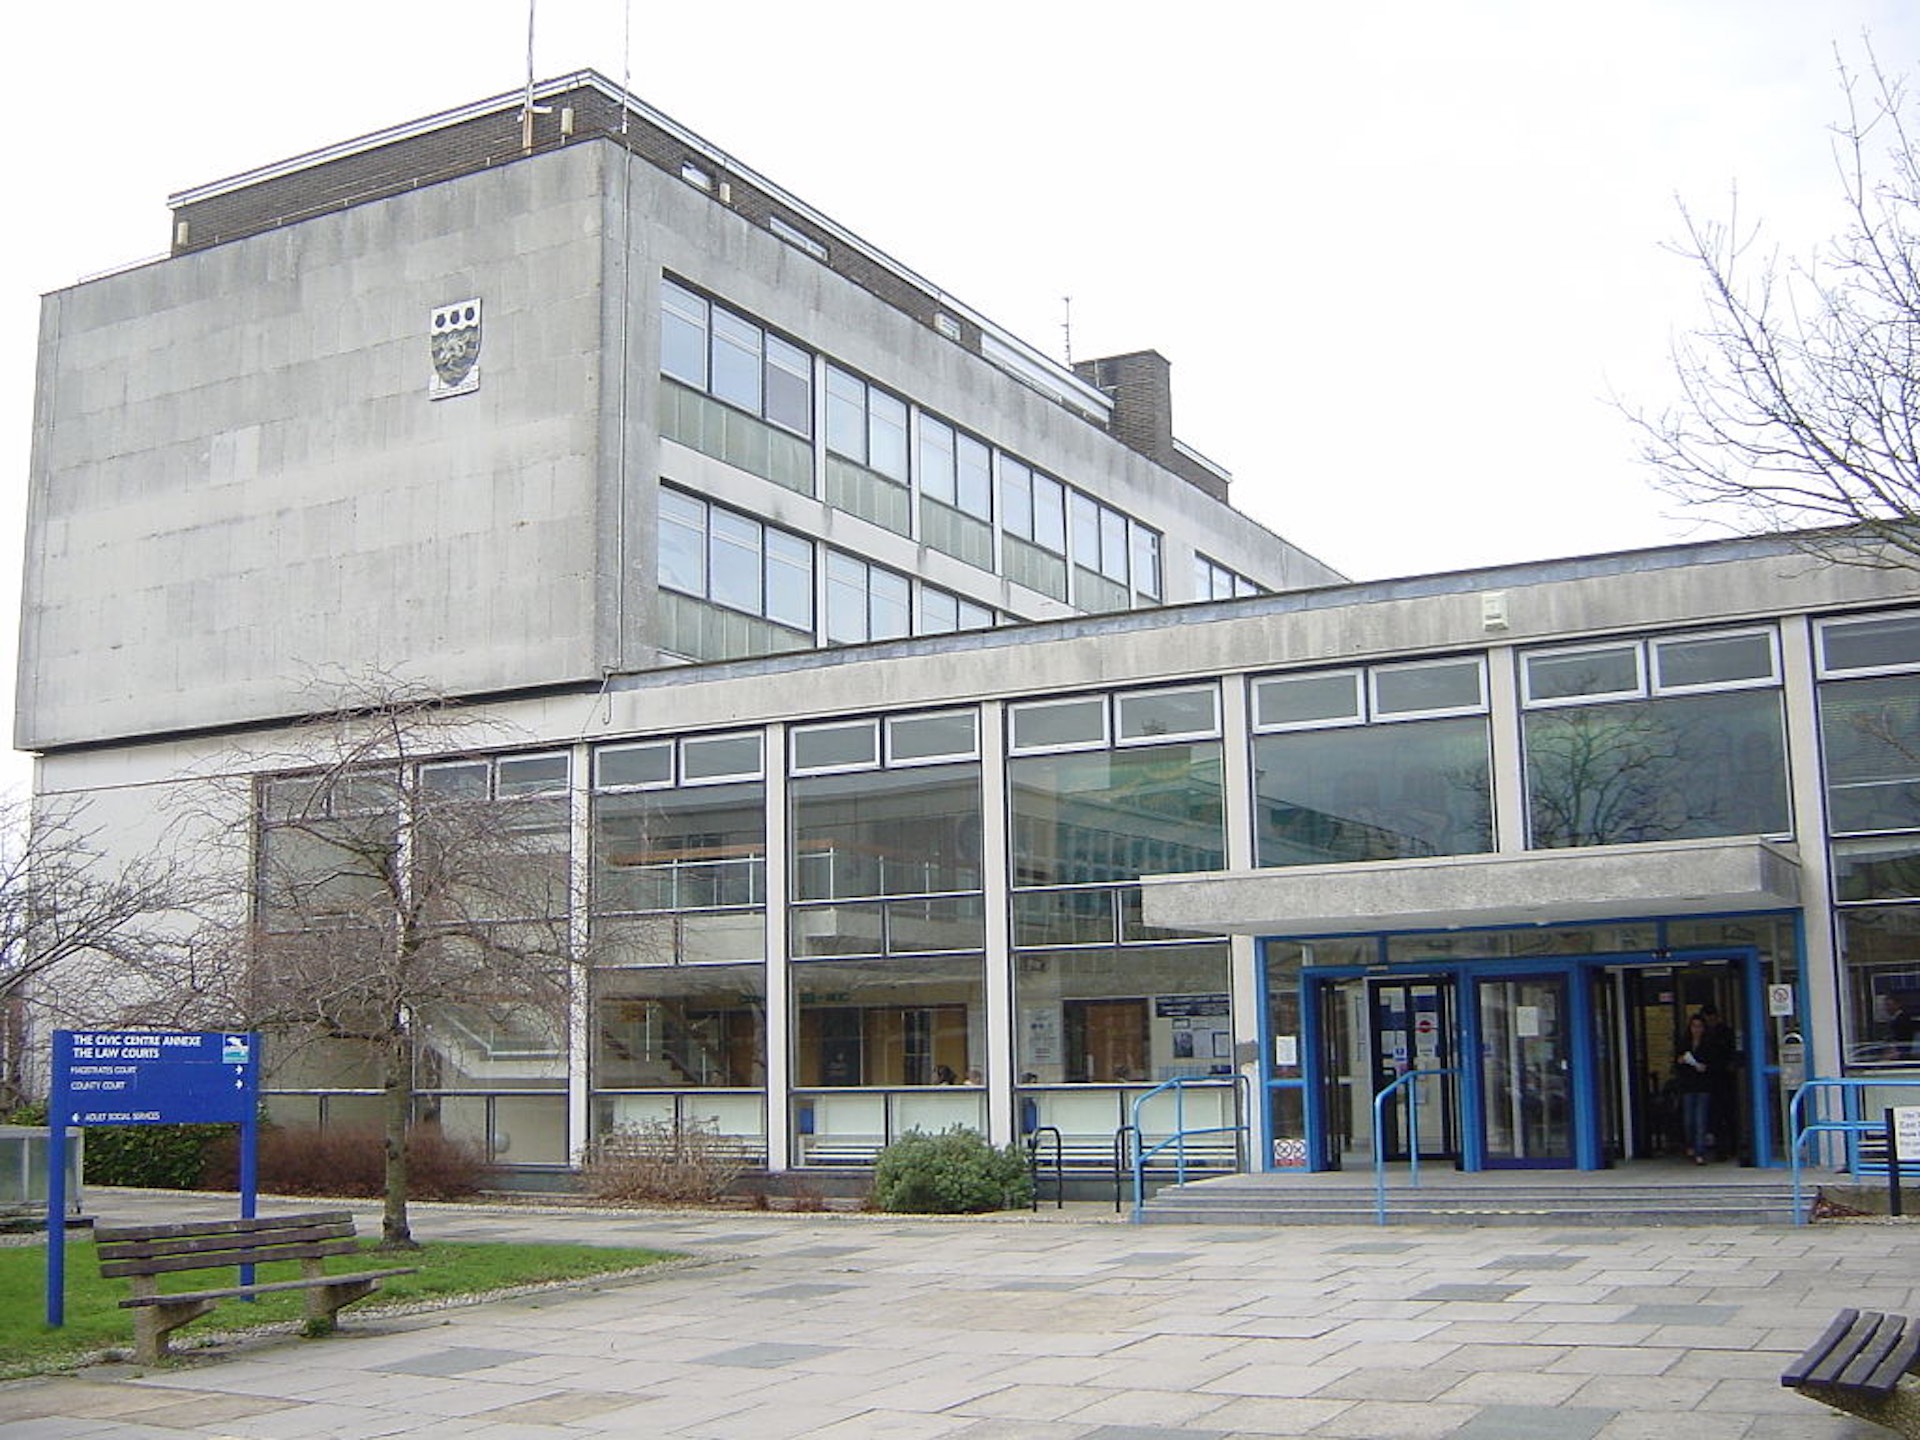 Poole Magistrates' Court, in Poole